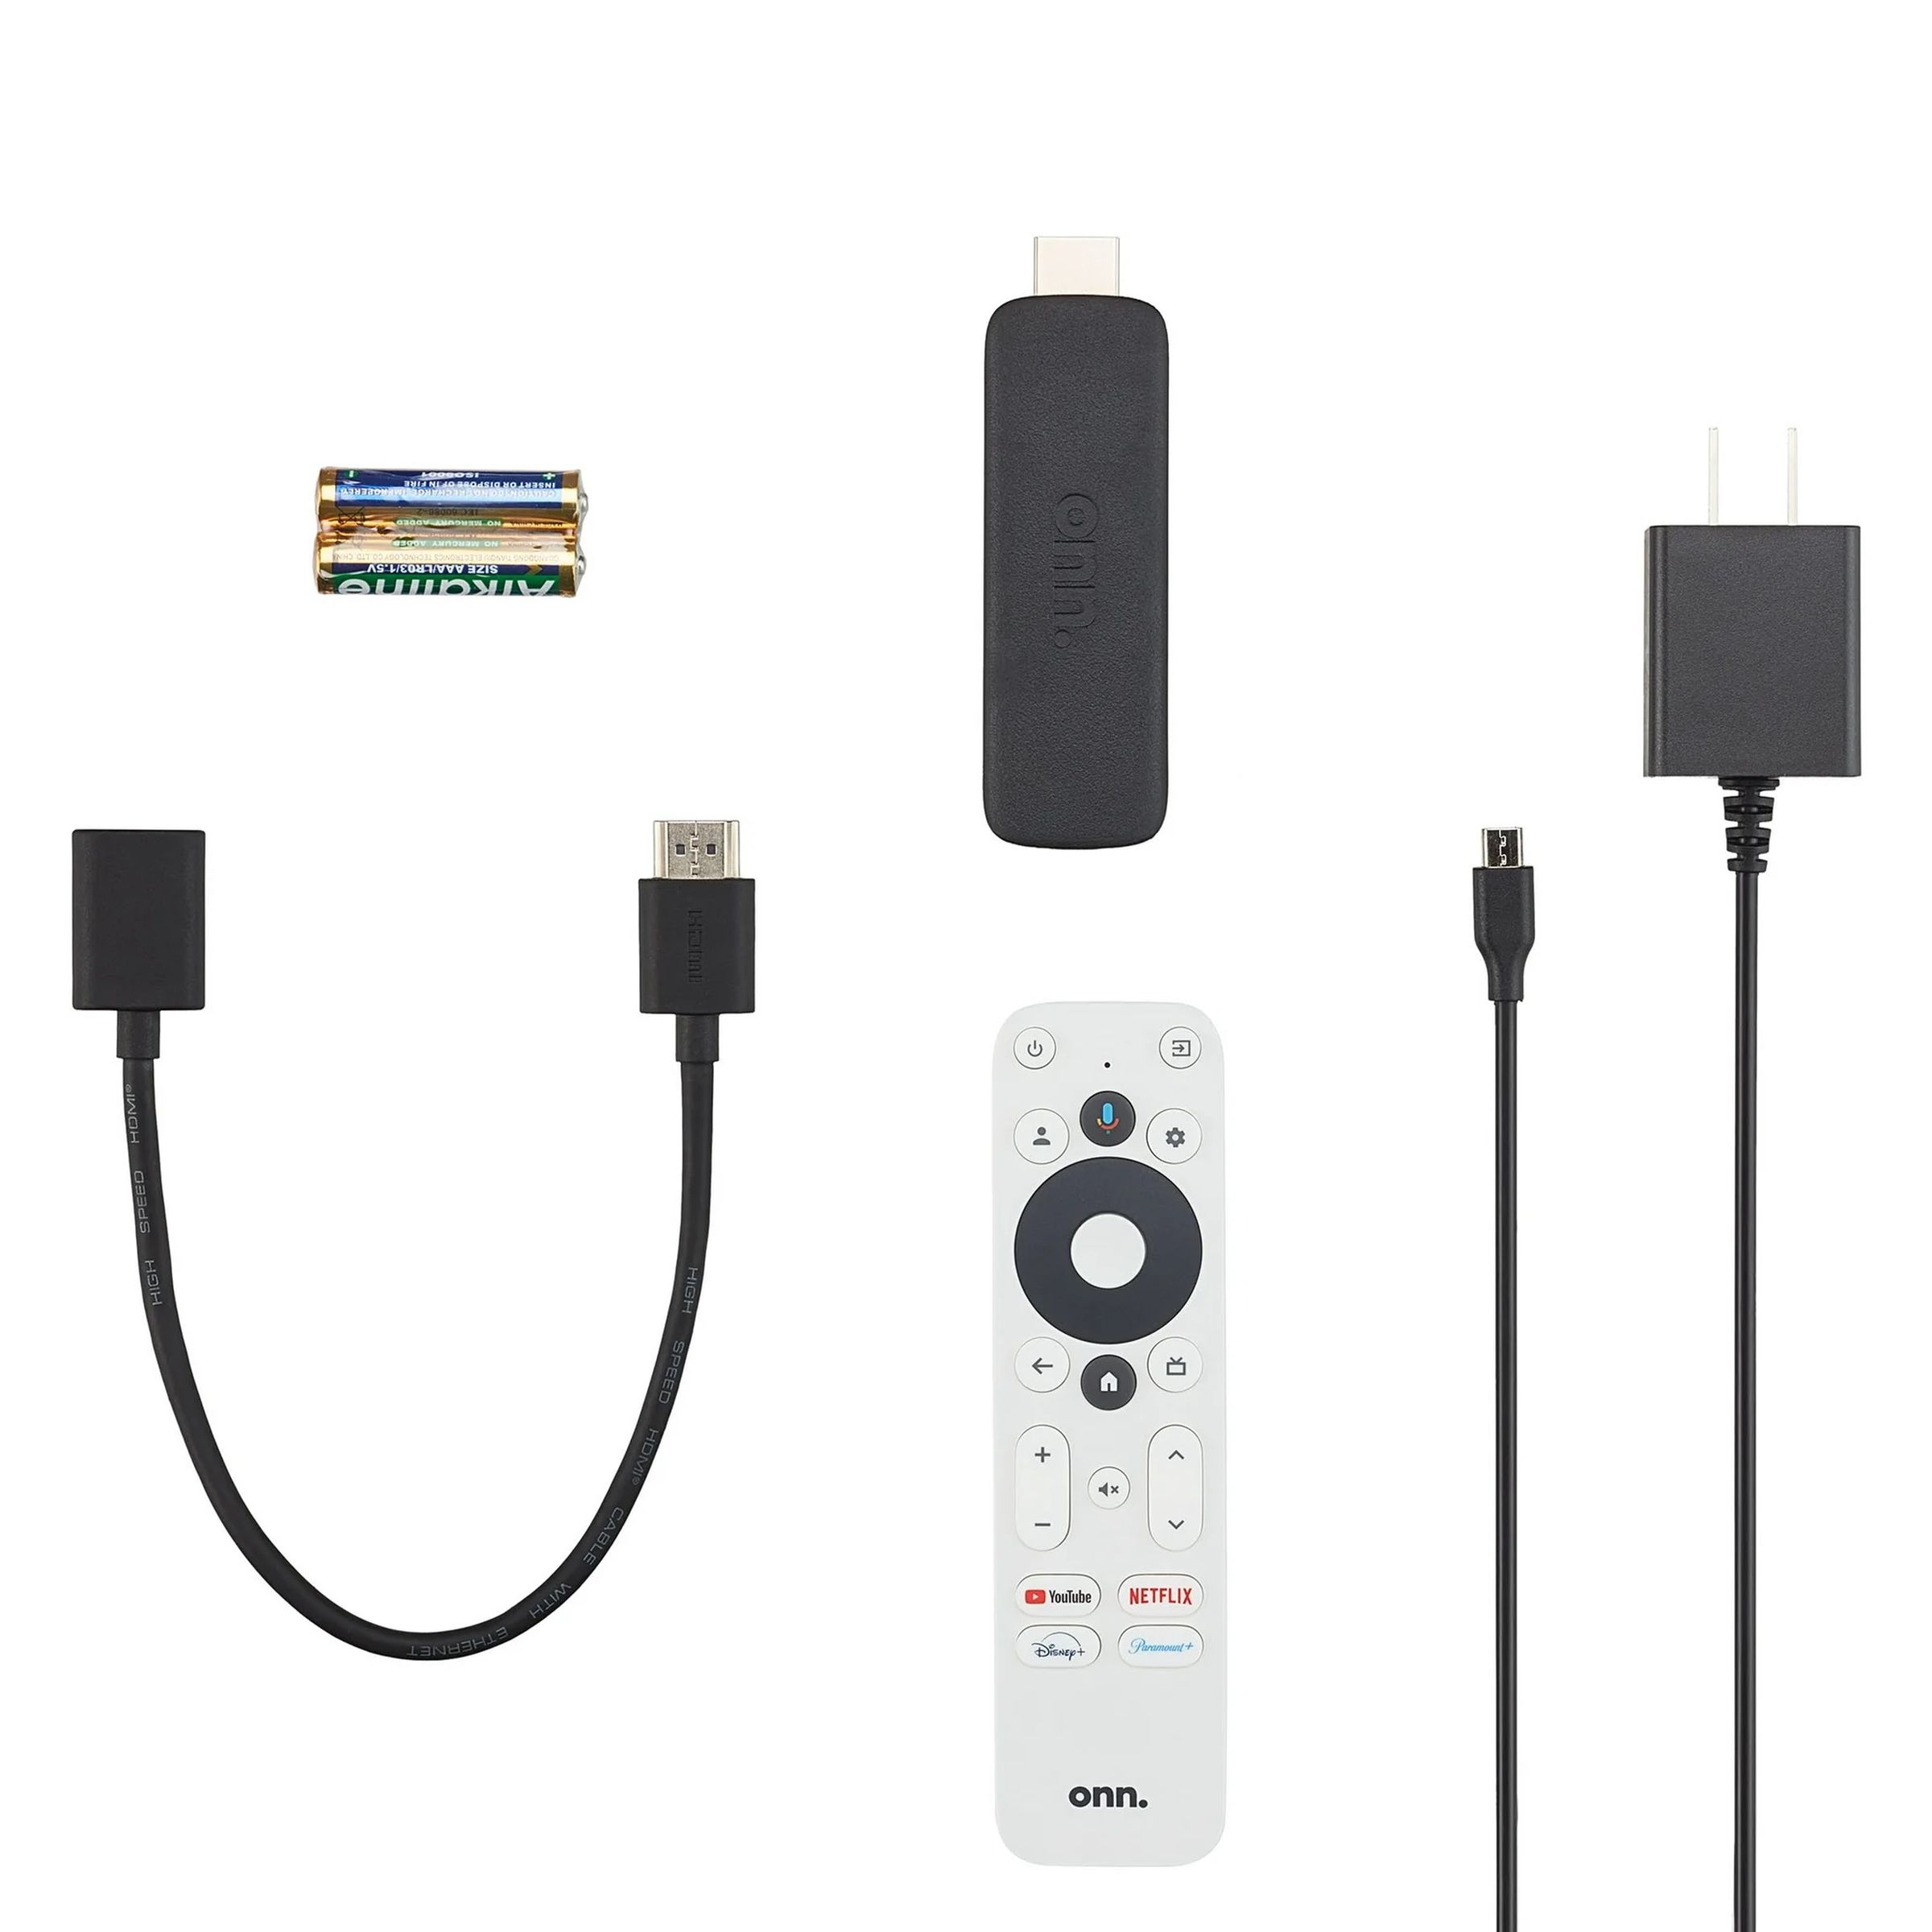 <em>The Onn stick comes with an HDMI cable and power cable.</em>